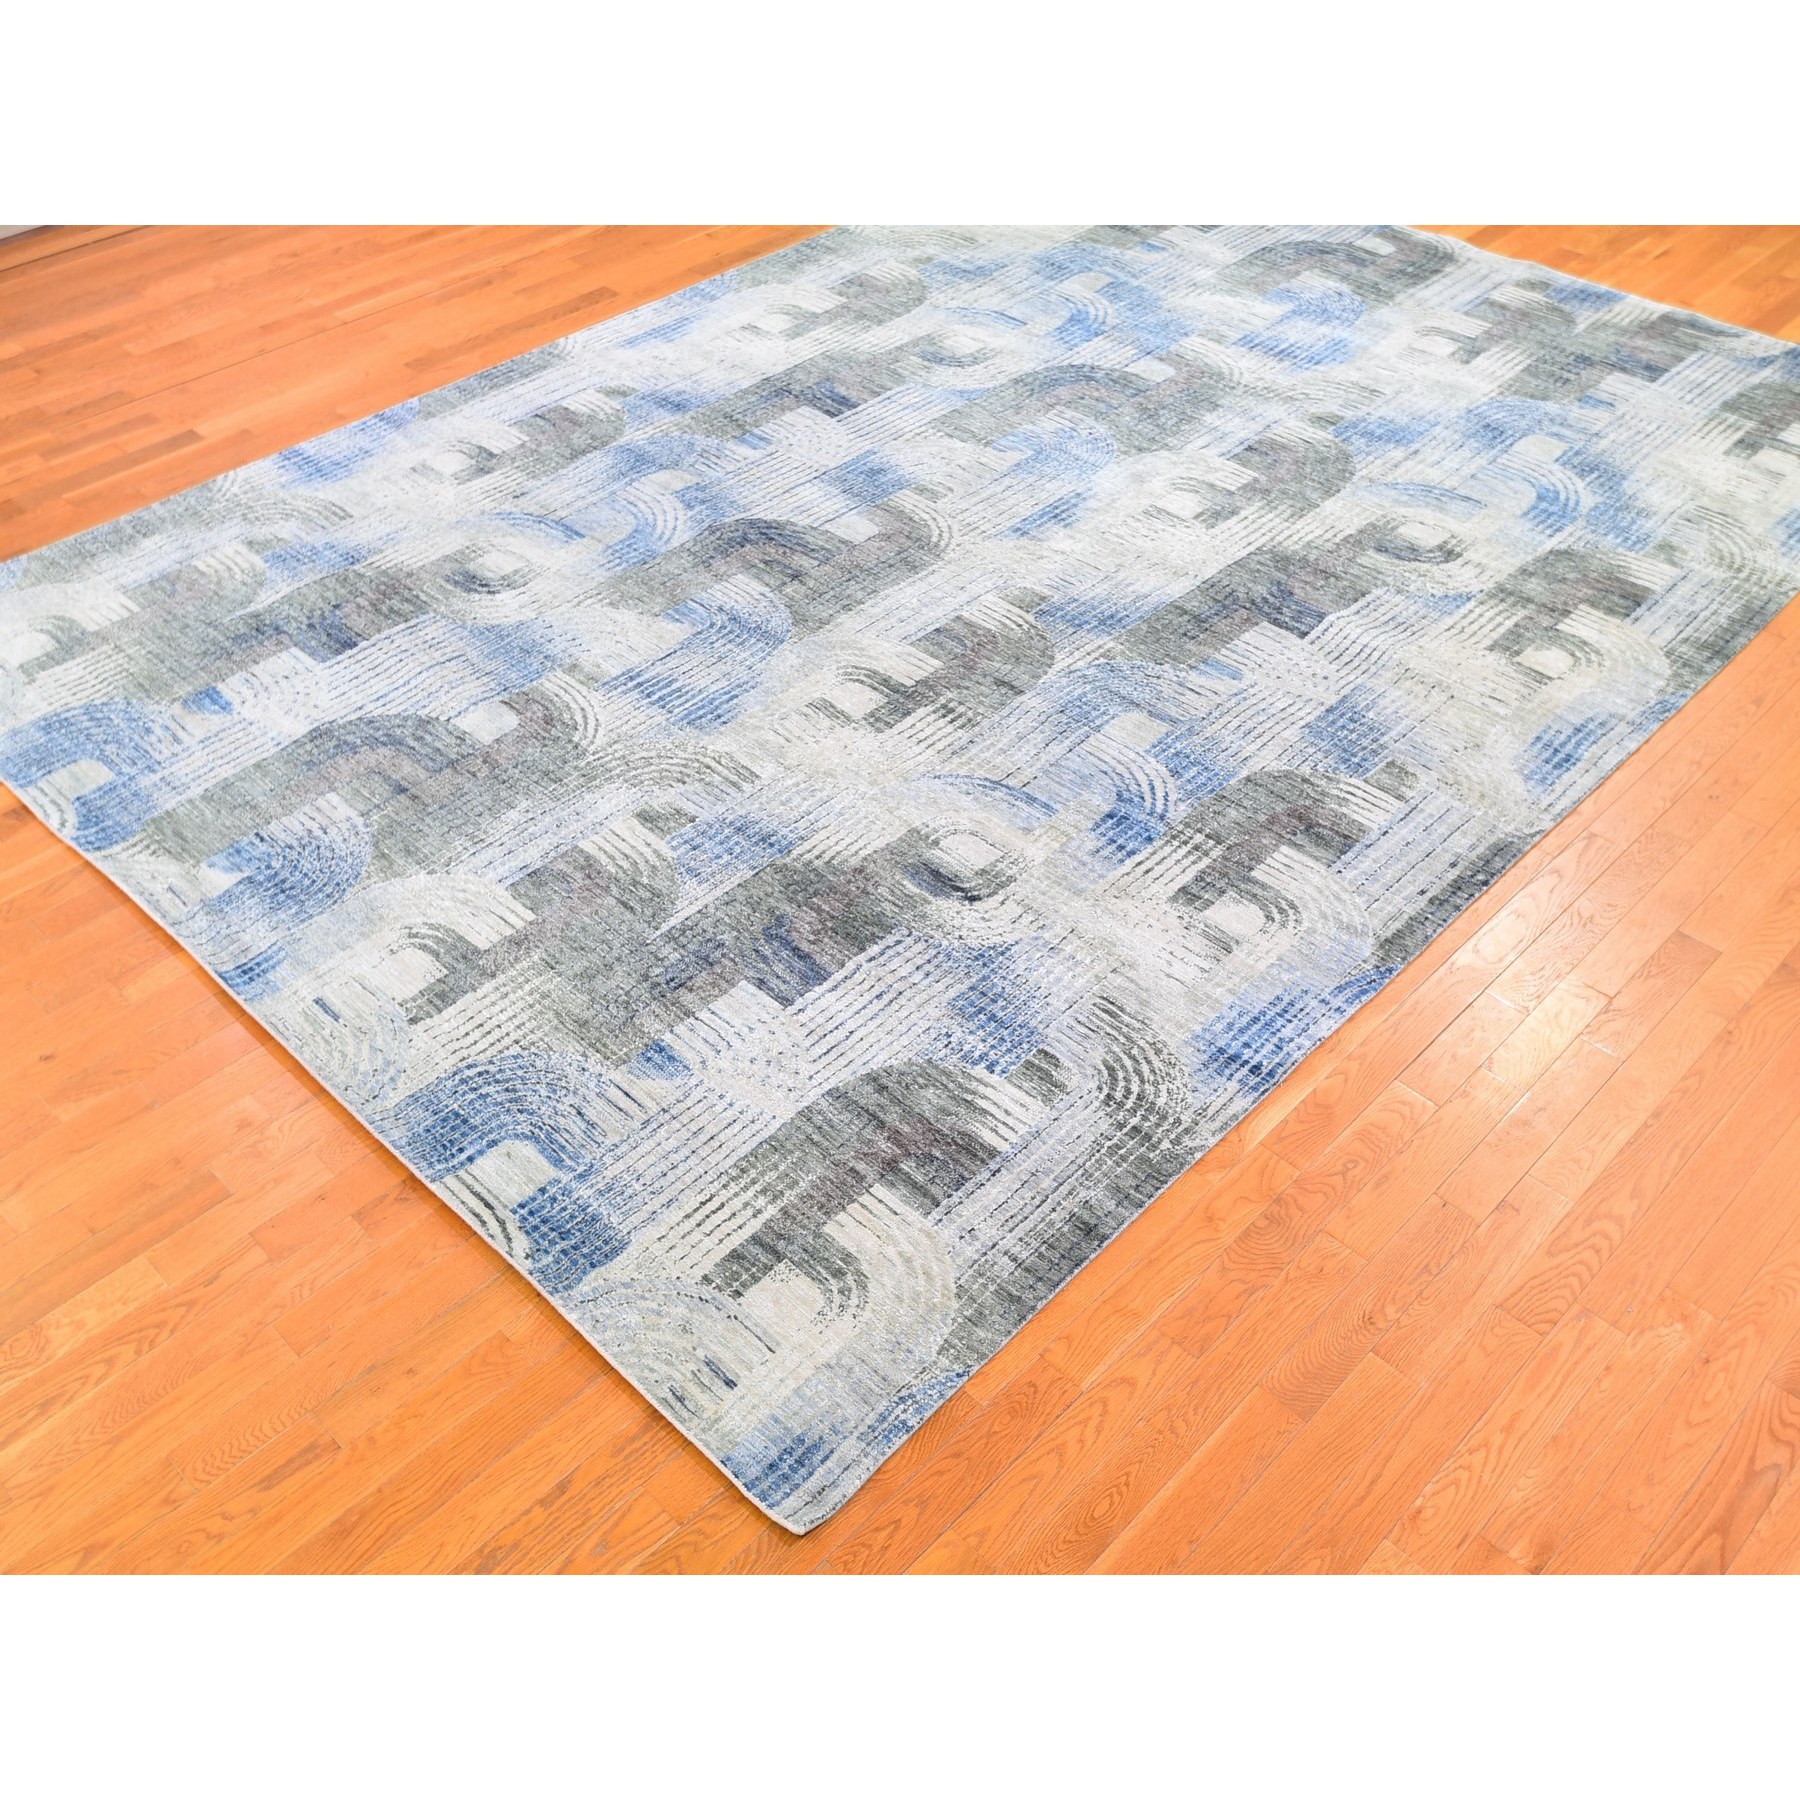 10'x14'3" THE INTERTWINED PASSAGE, Silk with Textured Wool Hand Woven Oriental Rug 